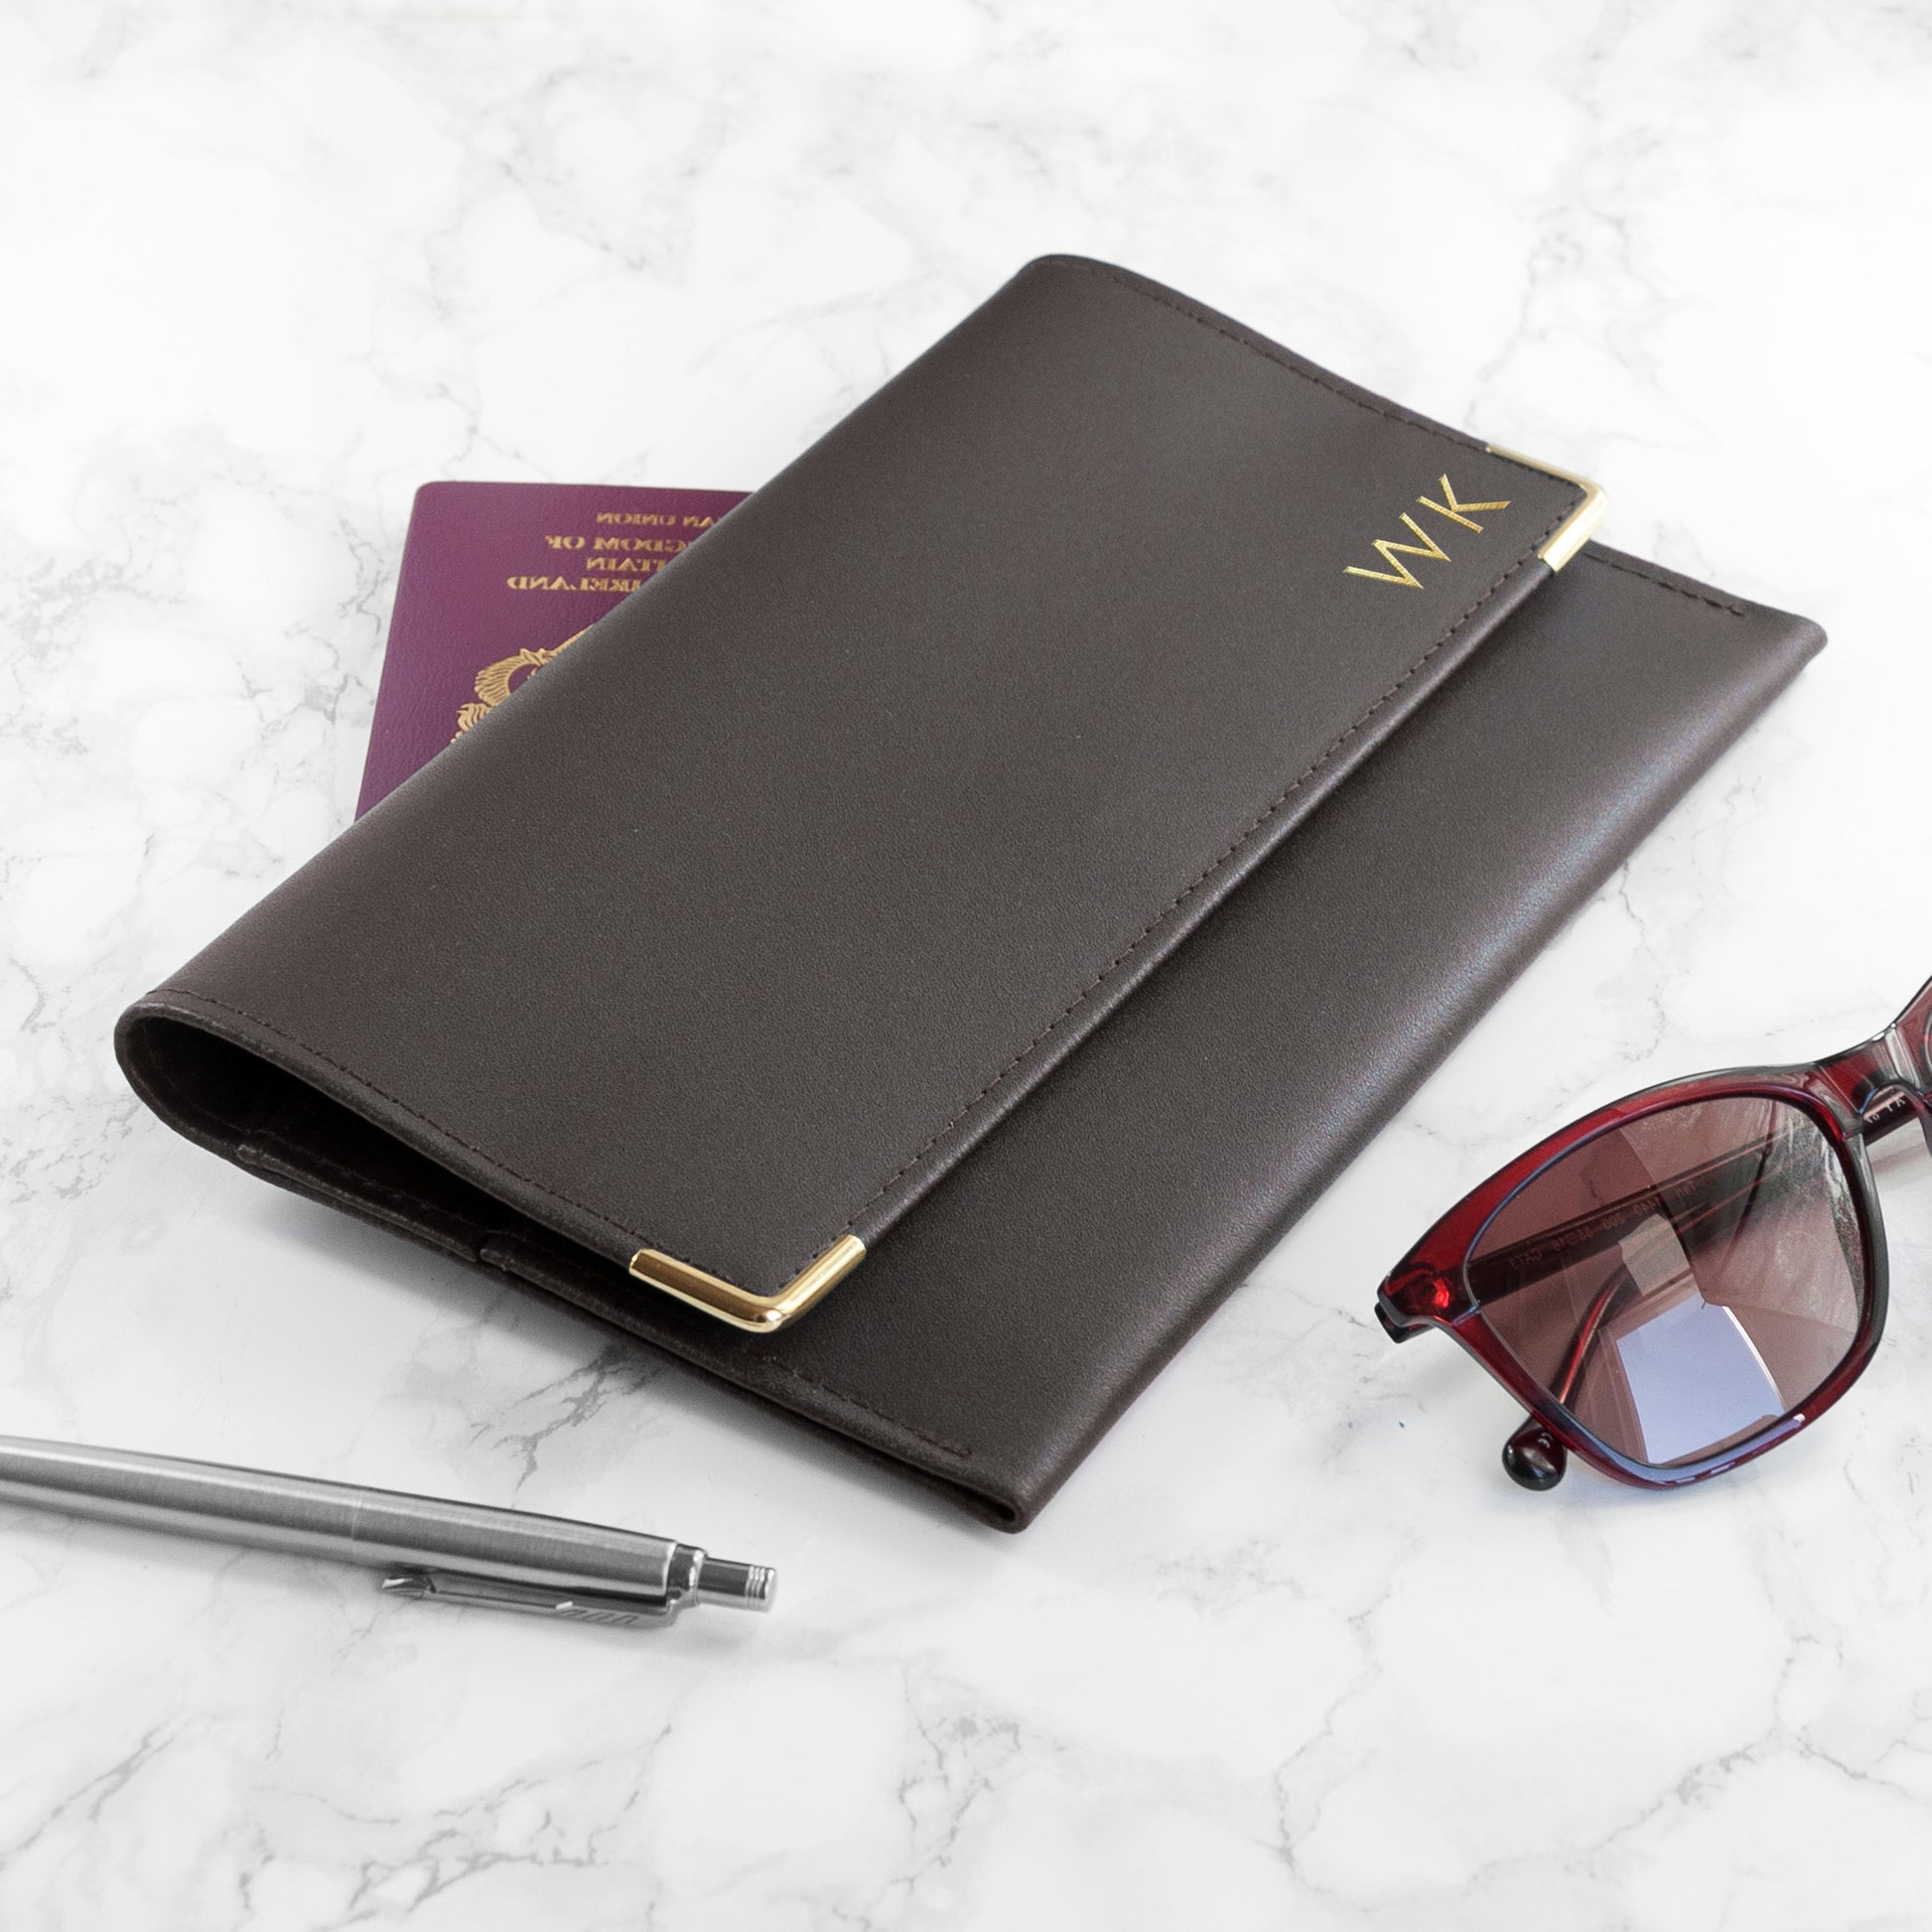 Personalized Travel Accessories - Personalized Luxury Leather Travel Organiser 